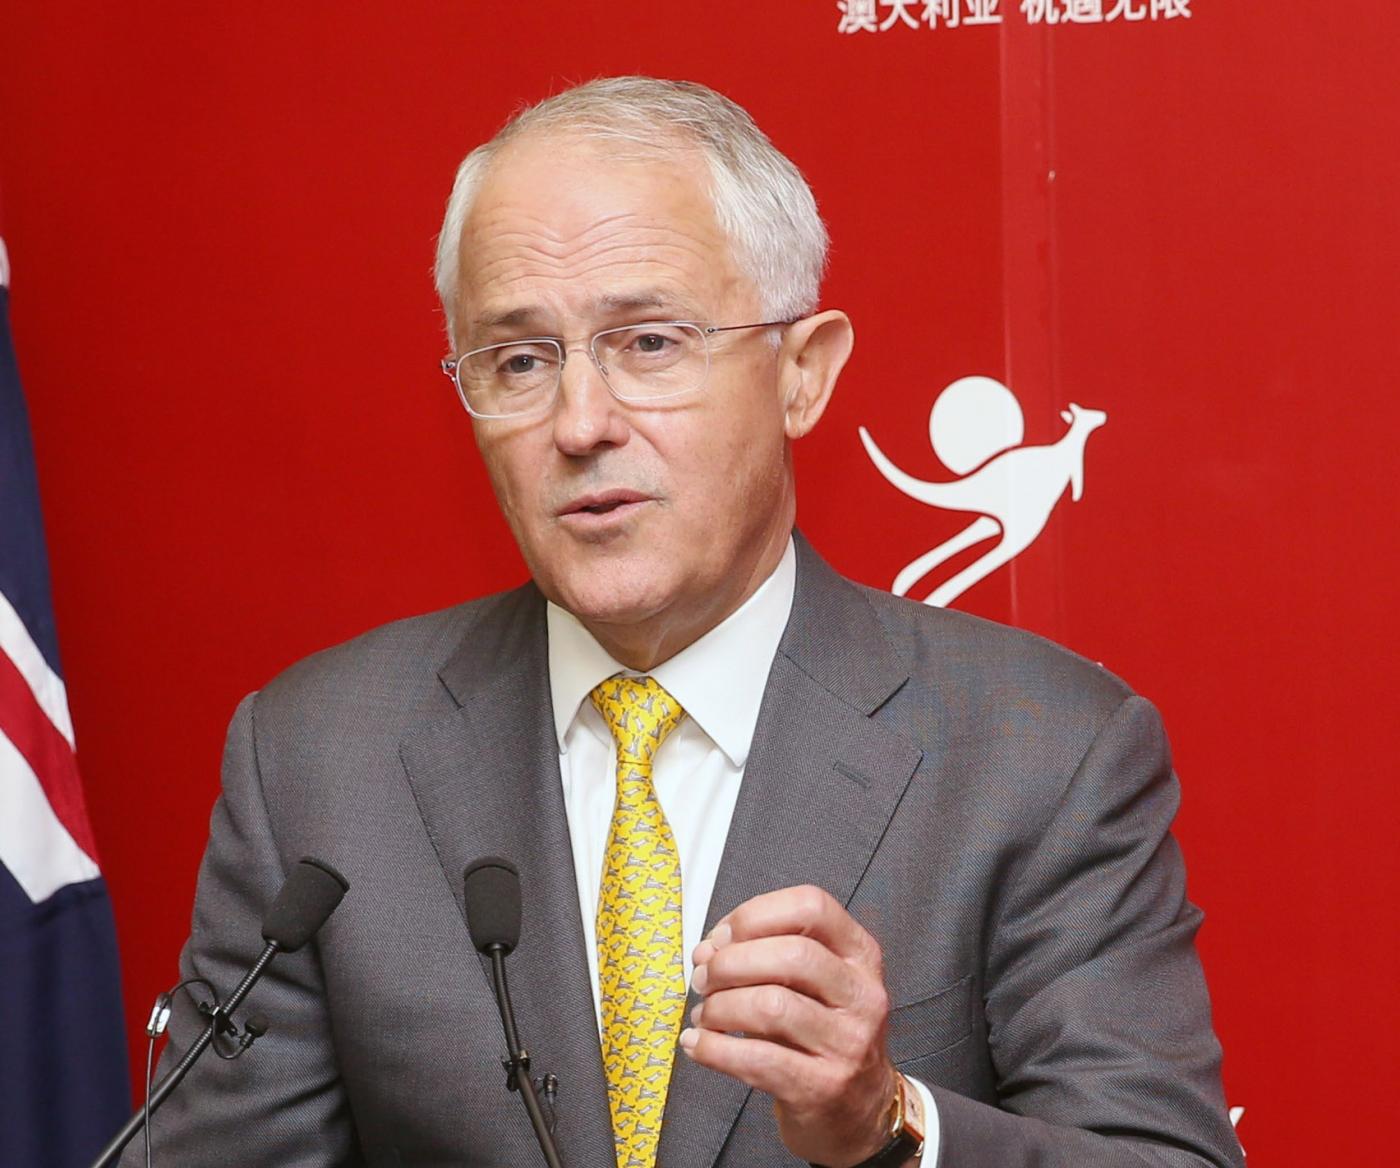 Australian Prime Minister Malcolm Turnbull. (File Photo: IANS) by IANS_ARCH.